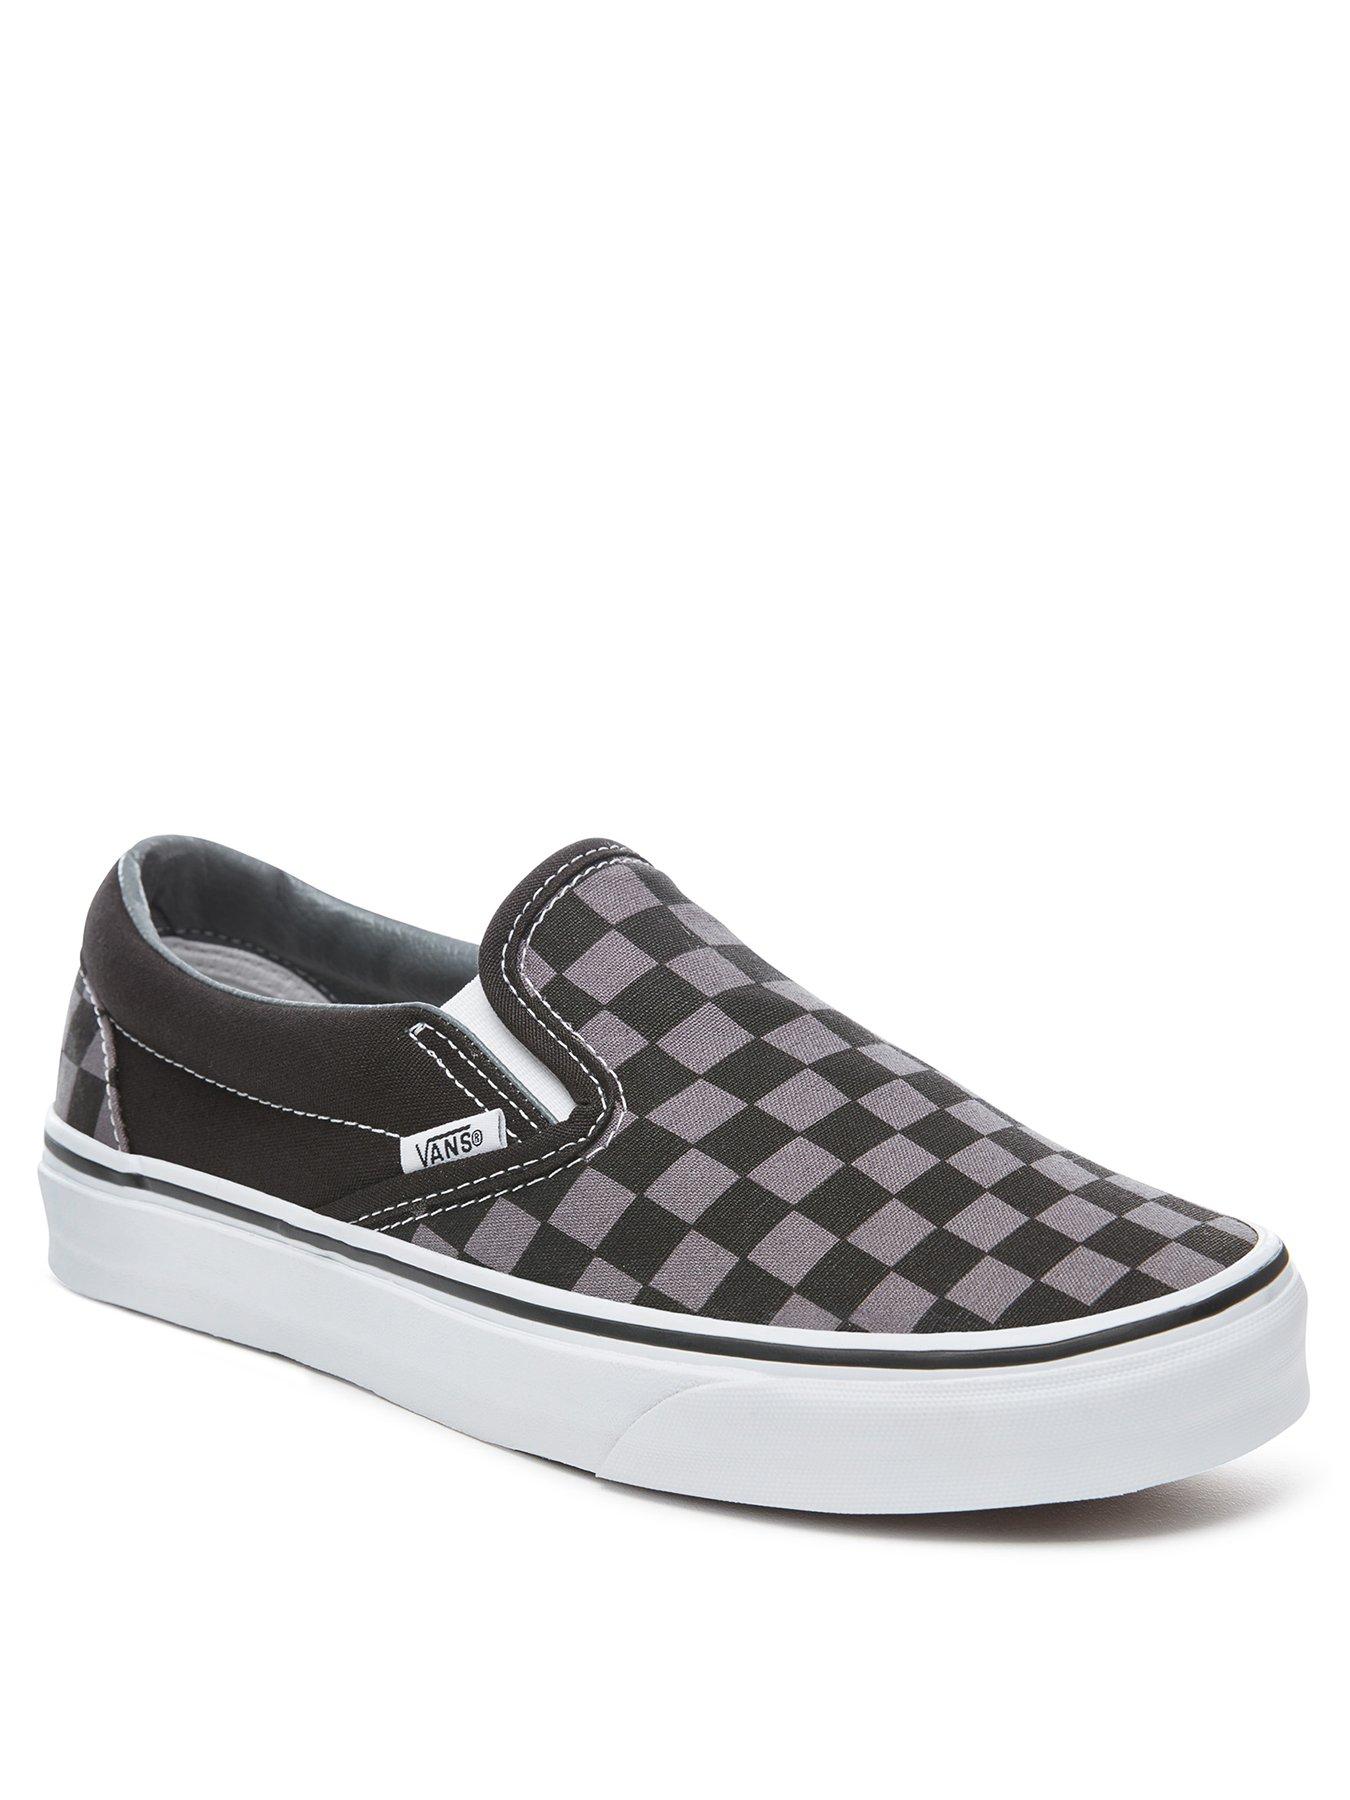 Vans Mens Classic Slip-On Trainers - Black/Grey Check | very.co.uk